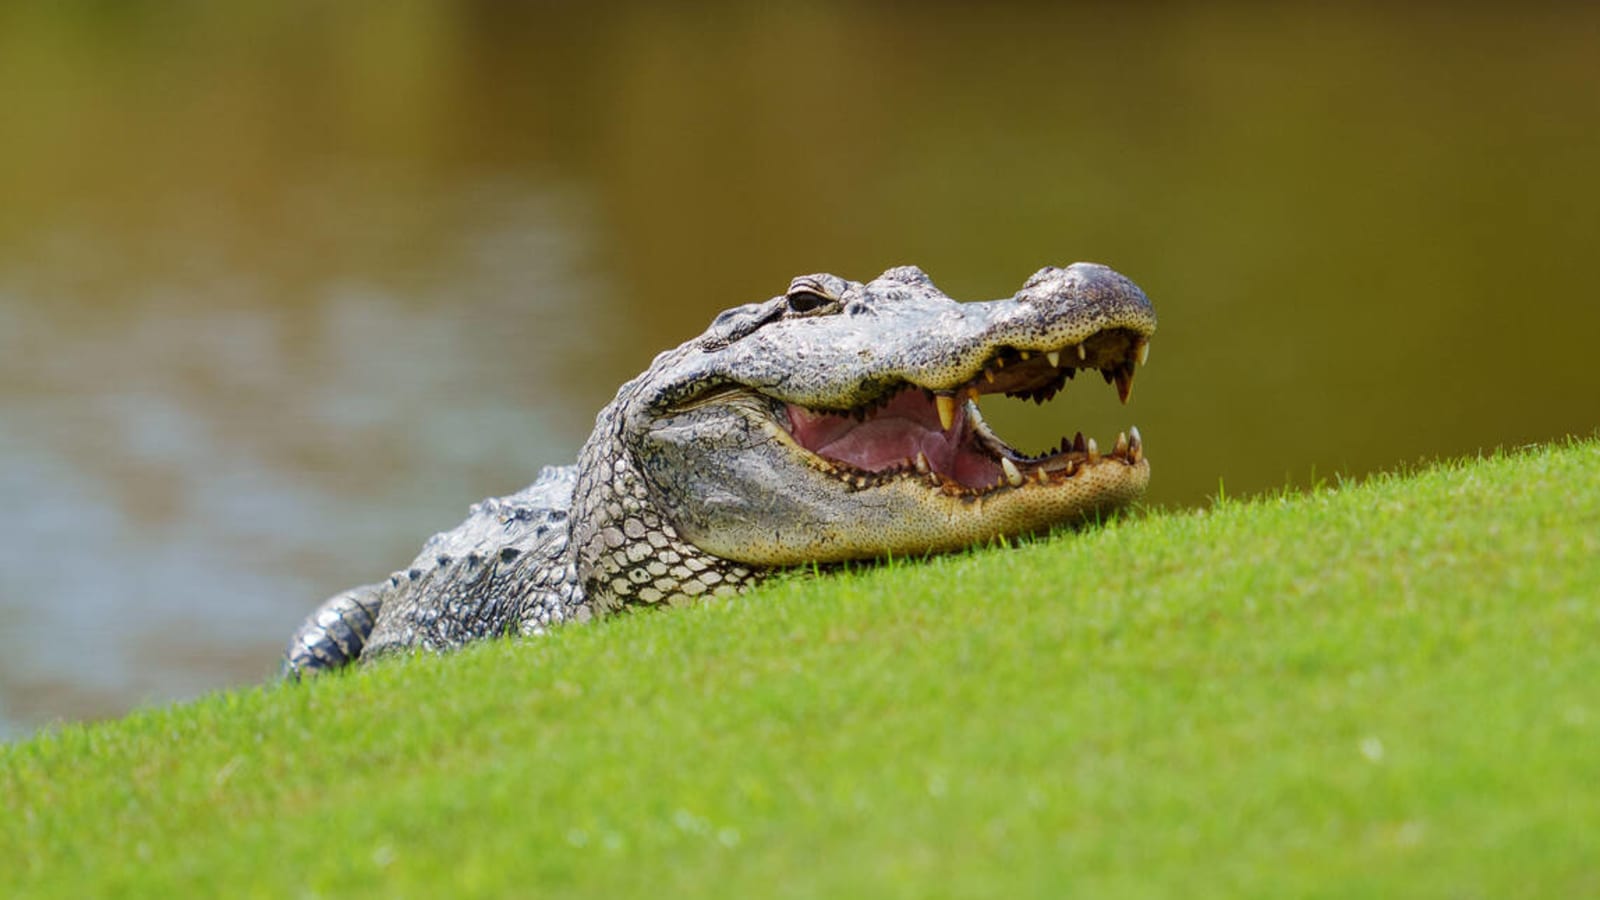 Viral video shows alligator that interrupted play at PGA tournament